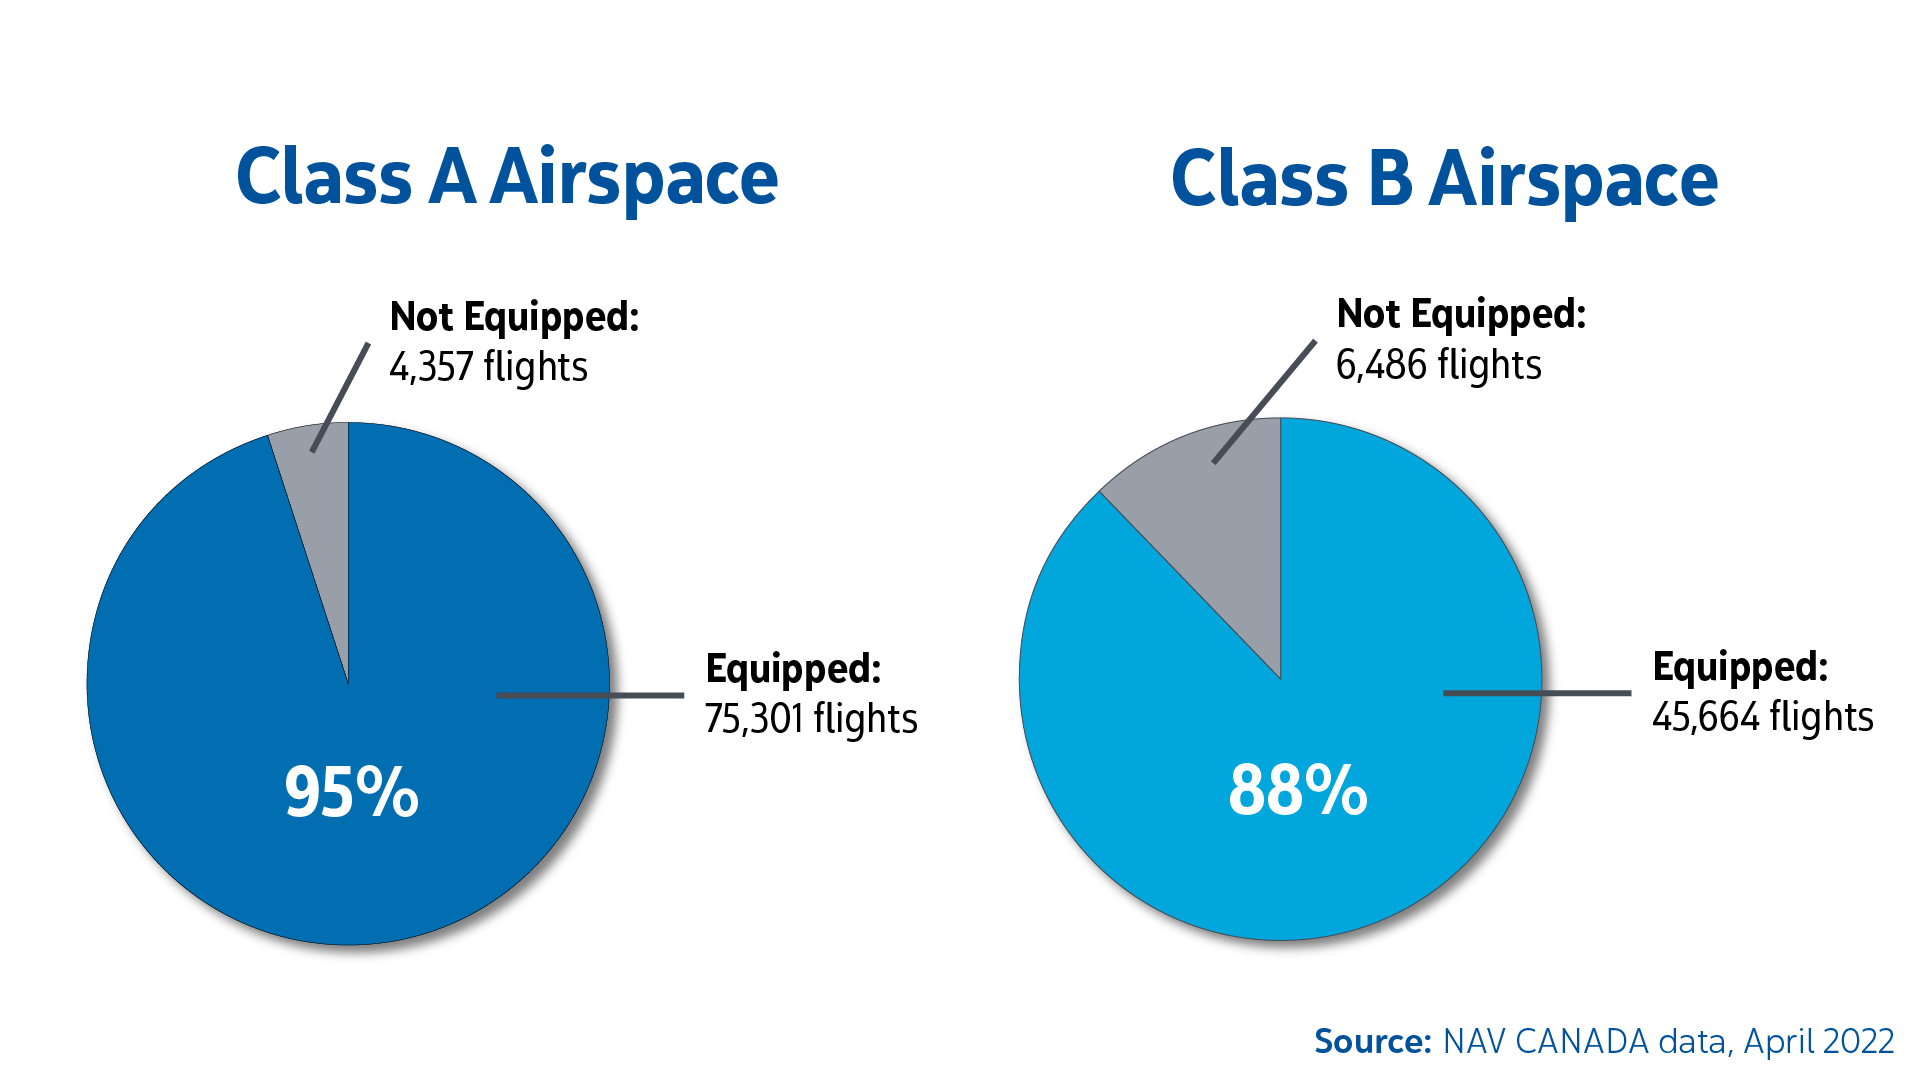 In April 2022, in Class A 73,301 (95%) of flights were equipped. In Class B, 45,664 (88%) of flights were equipped.